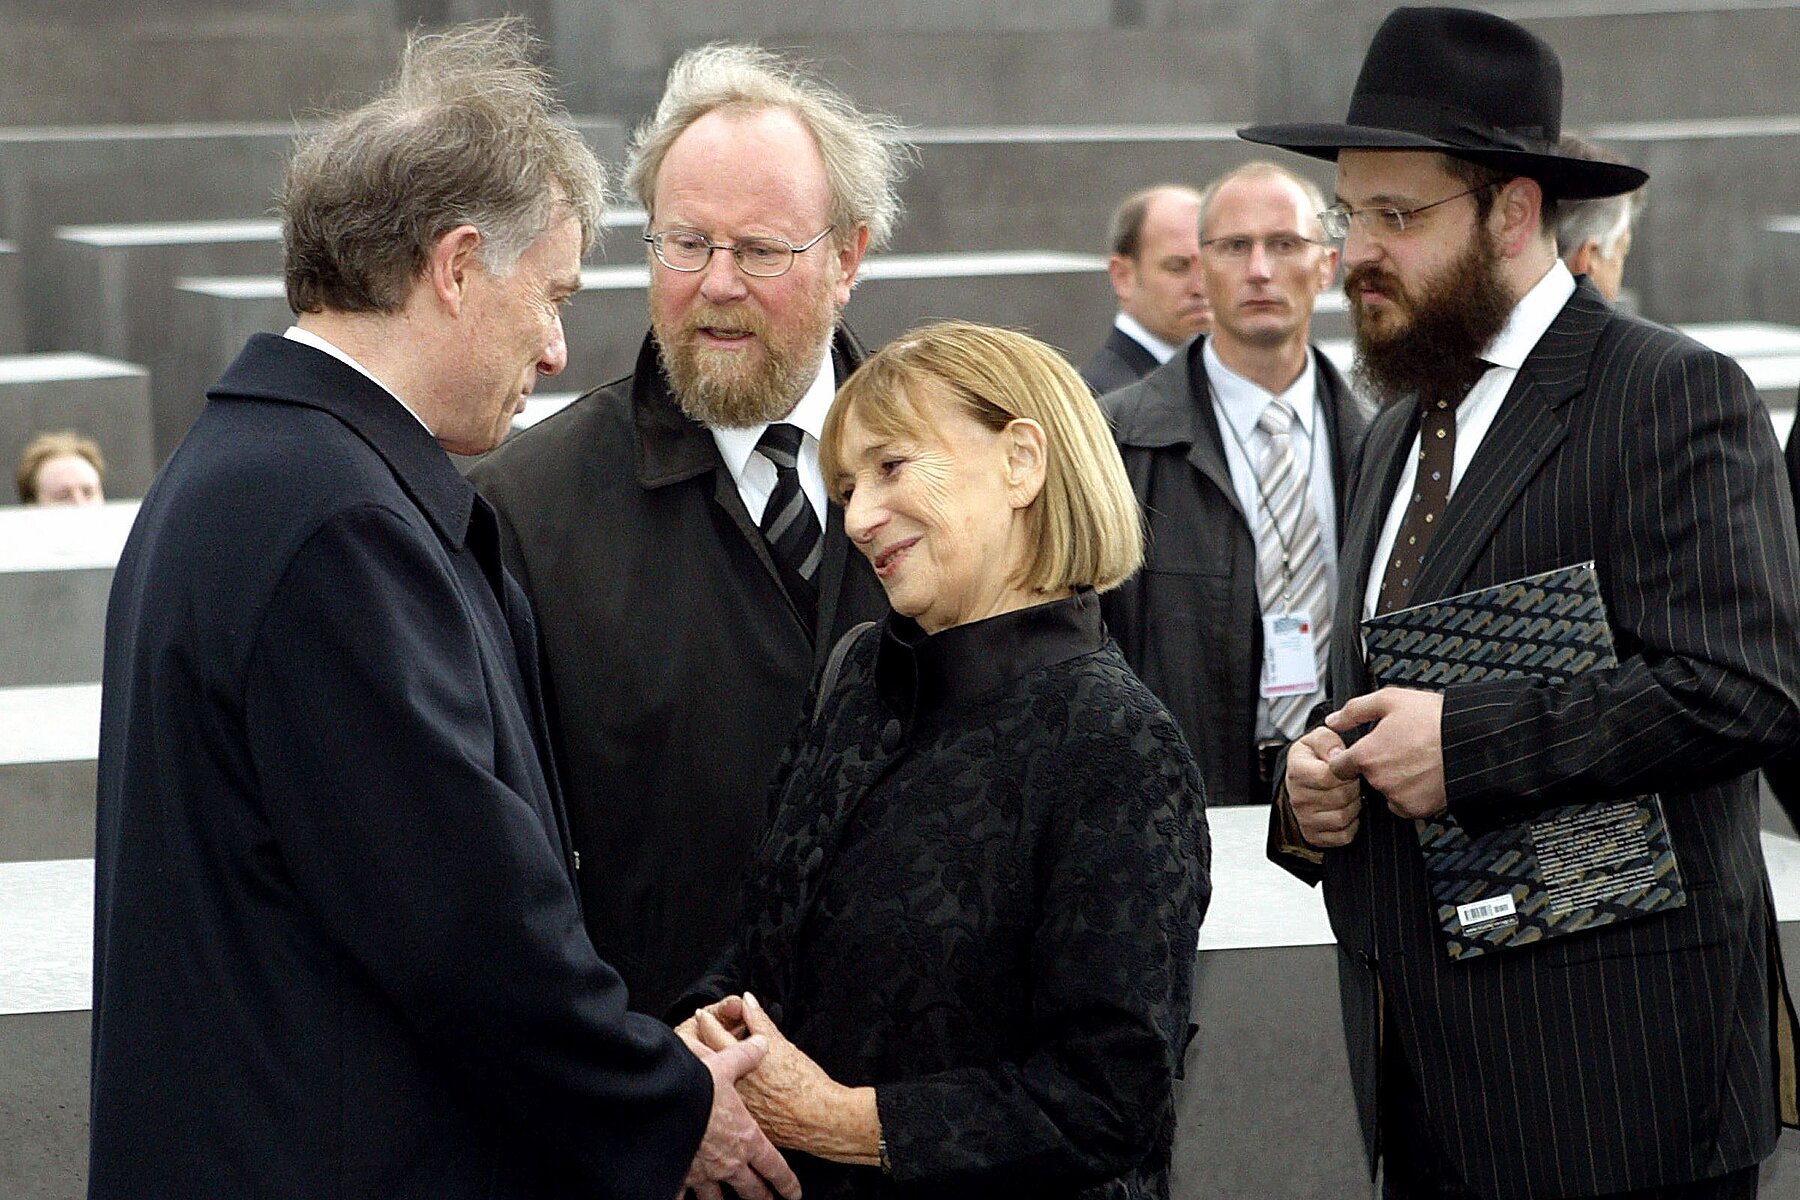 Two politicians, a woman and a Rabbi, all in black clothing, in a conversation in front of the concrete stelae of the memorial.